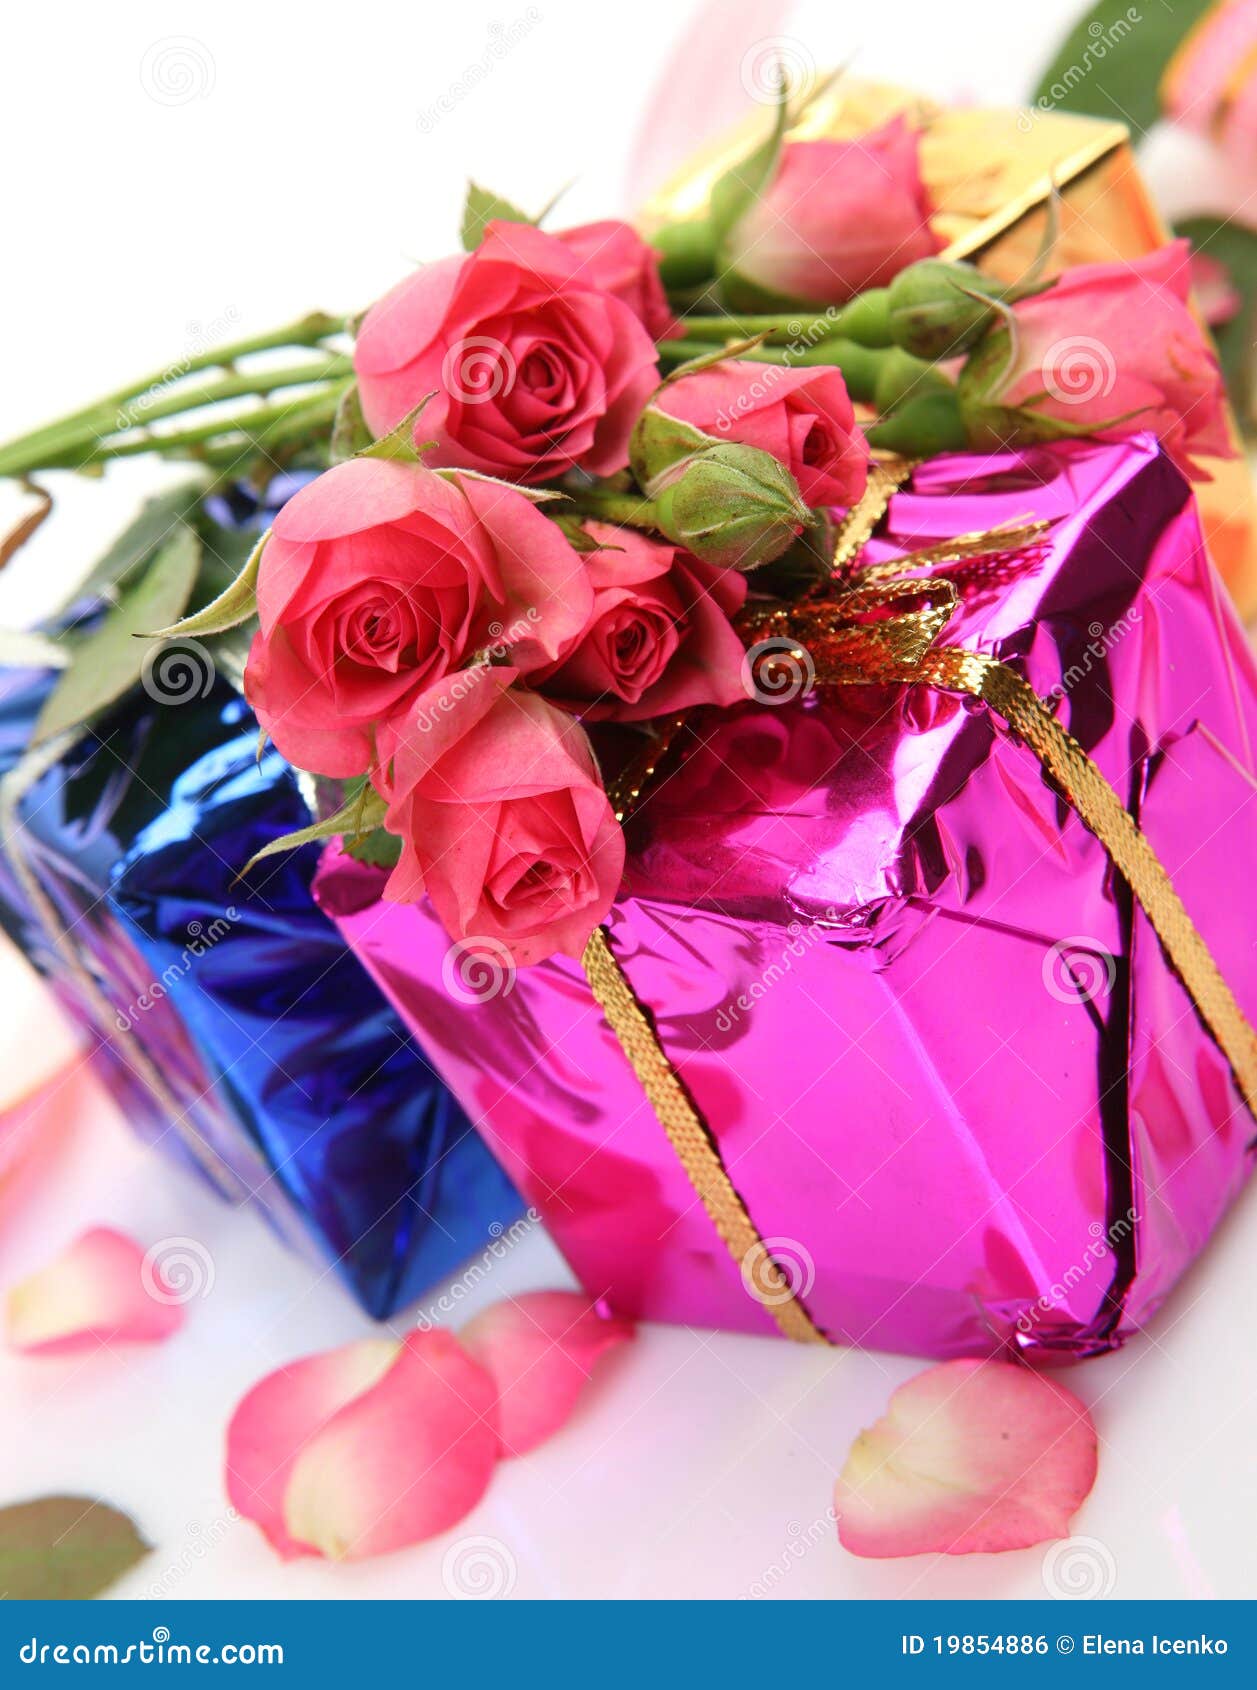 15 Best Types of Flowers for Birthday Gifts  Petal Republic